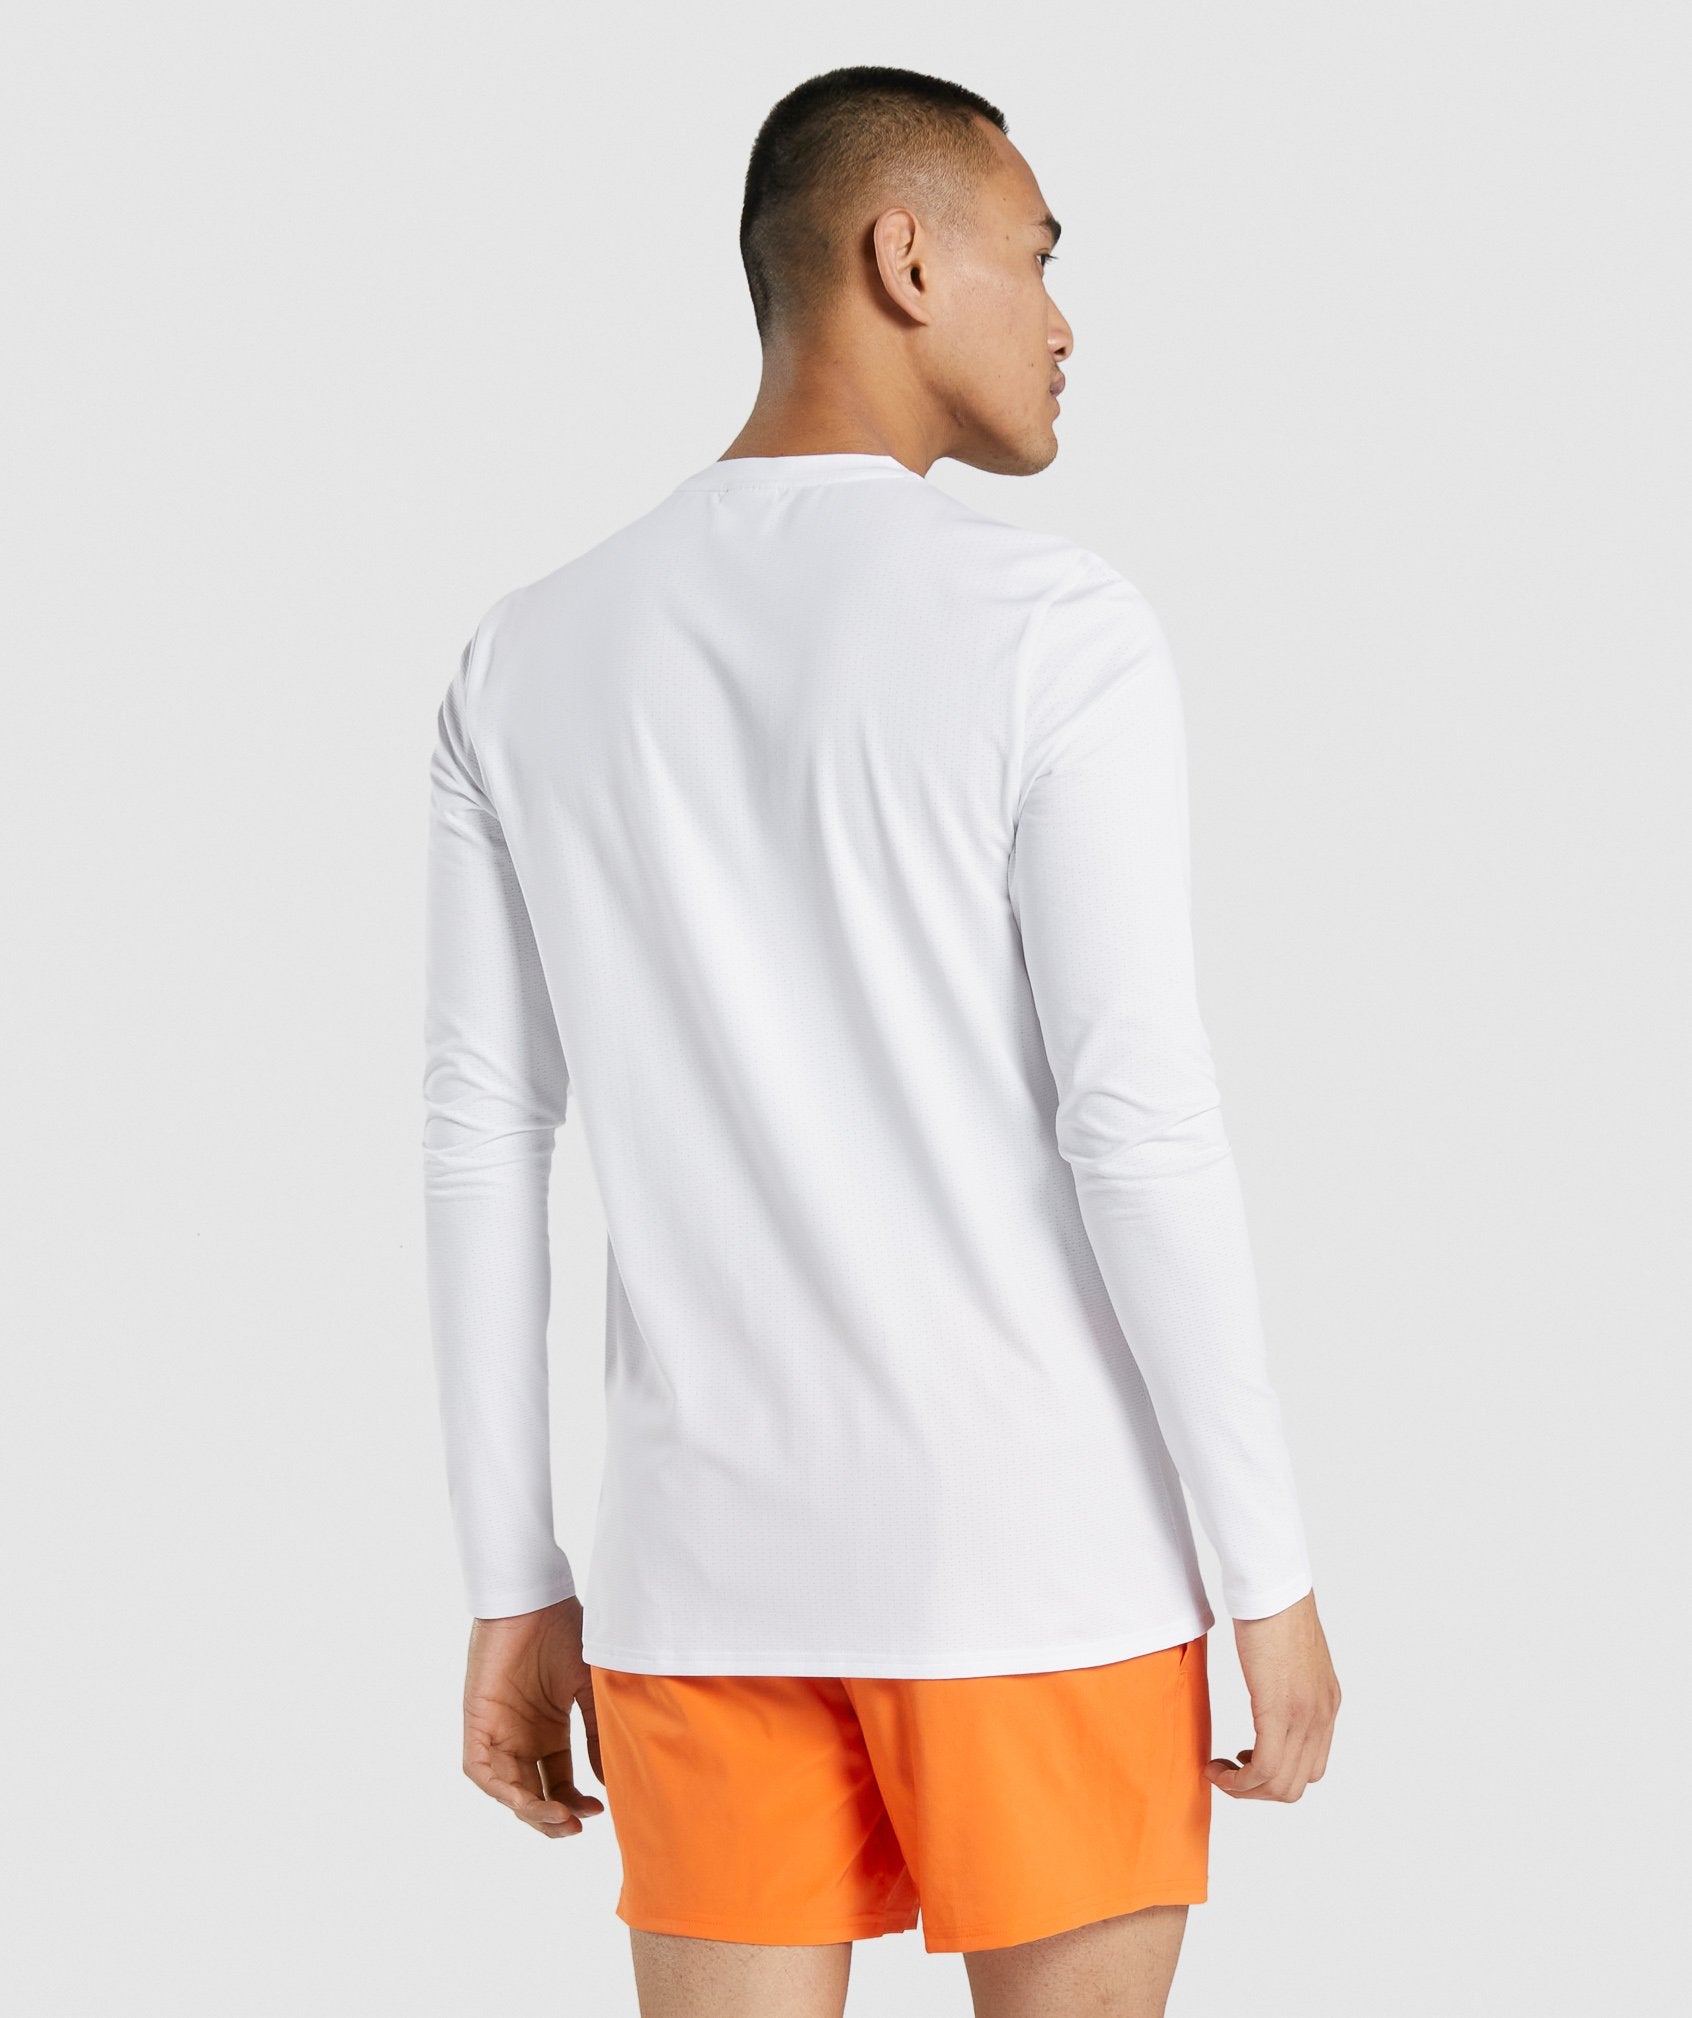 Arrival Graphic Long Sleeve T-Shirt in White